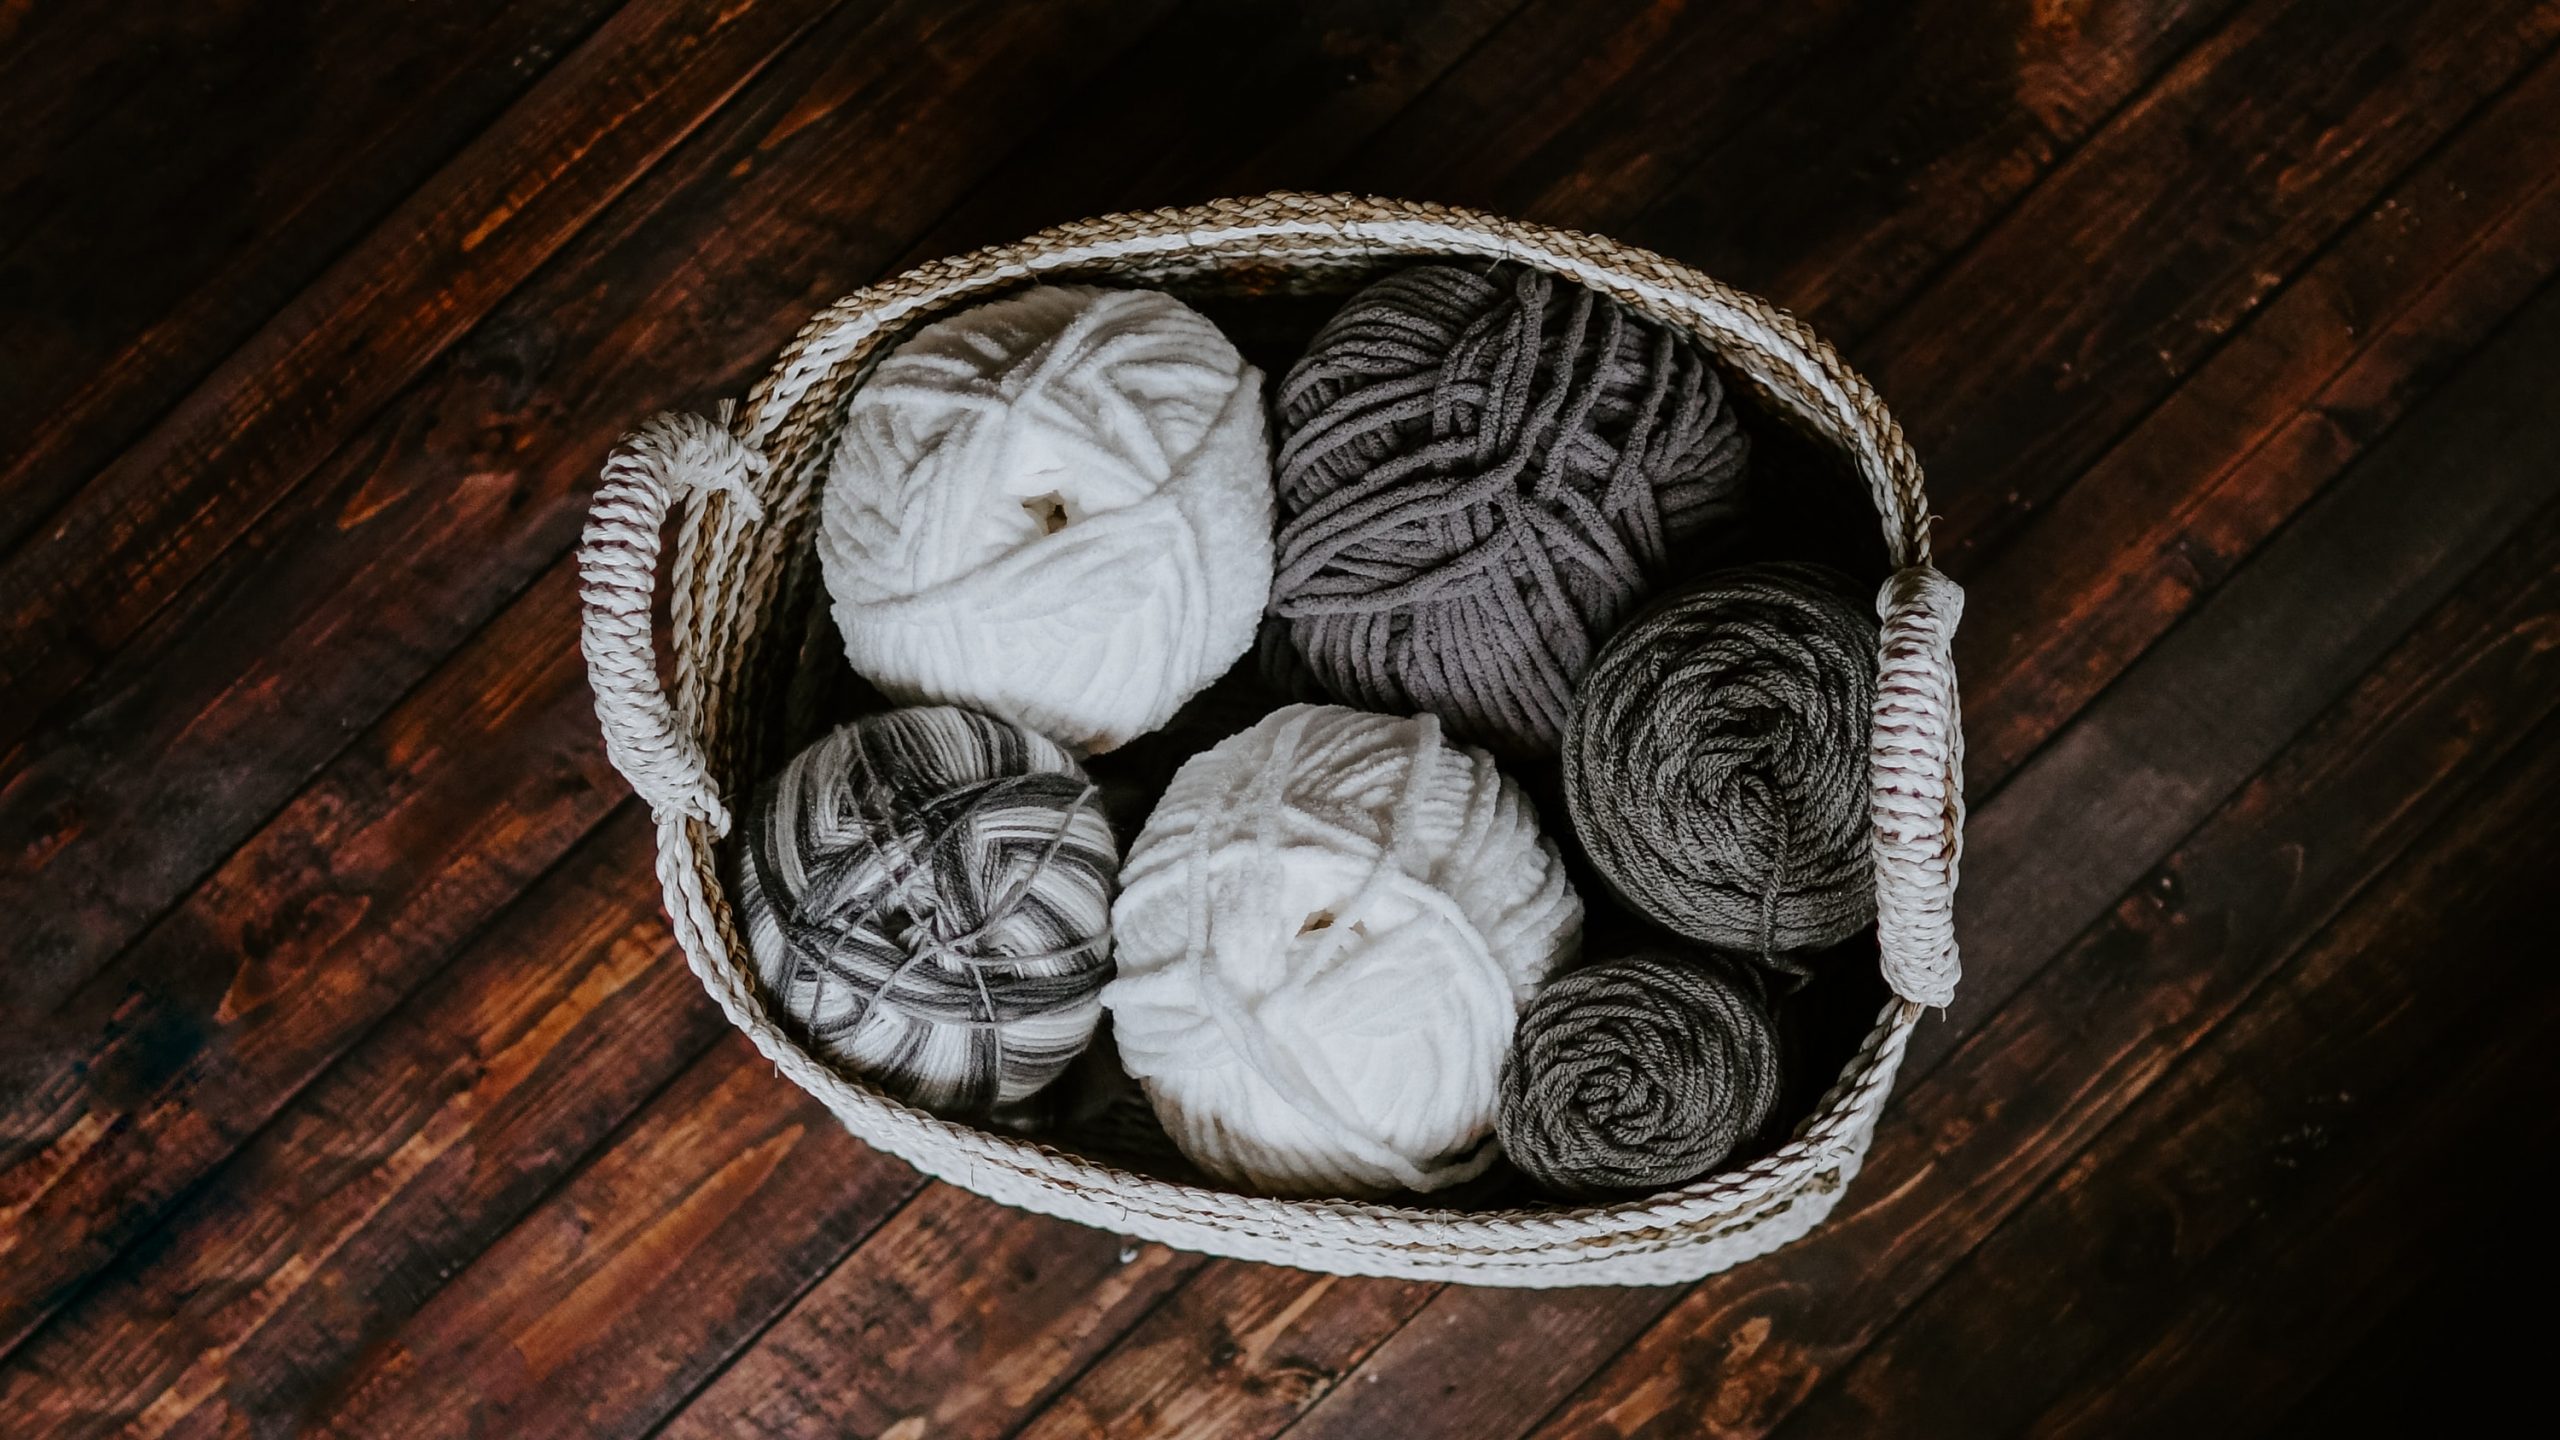 Lena Ladakh Pashmina - These pristine yarn balls!! When your co-workers are  artisans who are also supermoms taking care of their household activities ,  you have to set a schedule for their